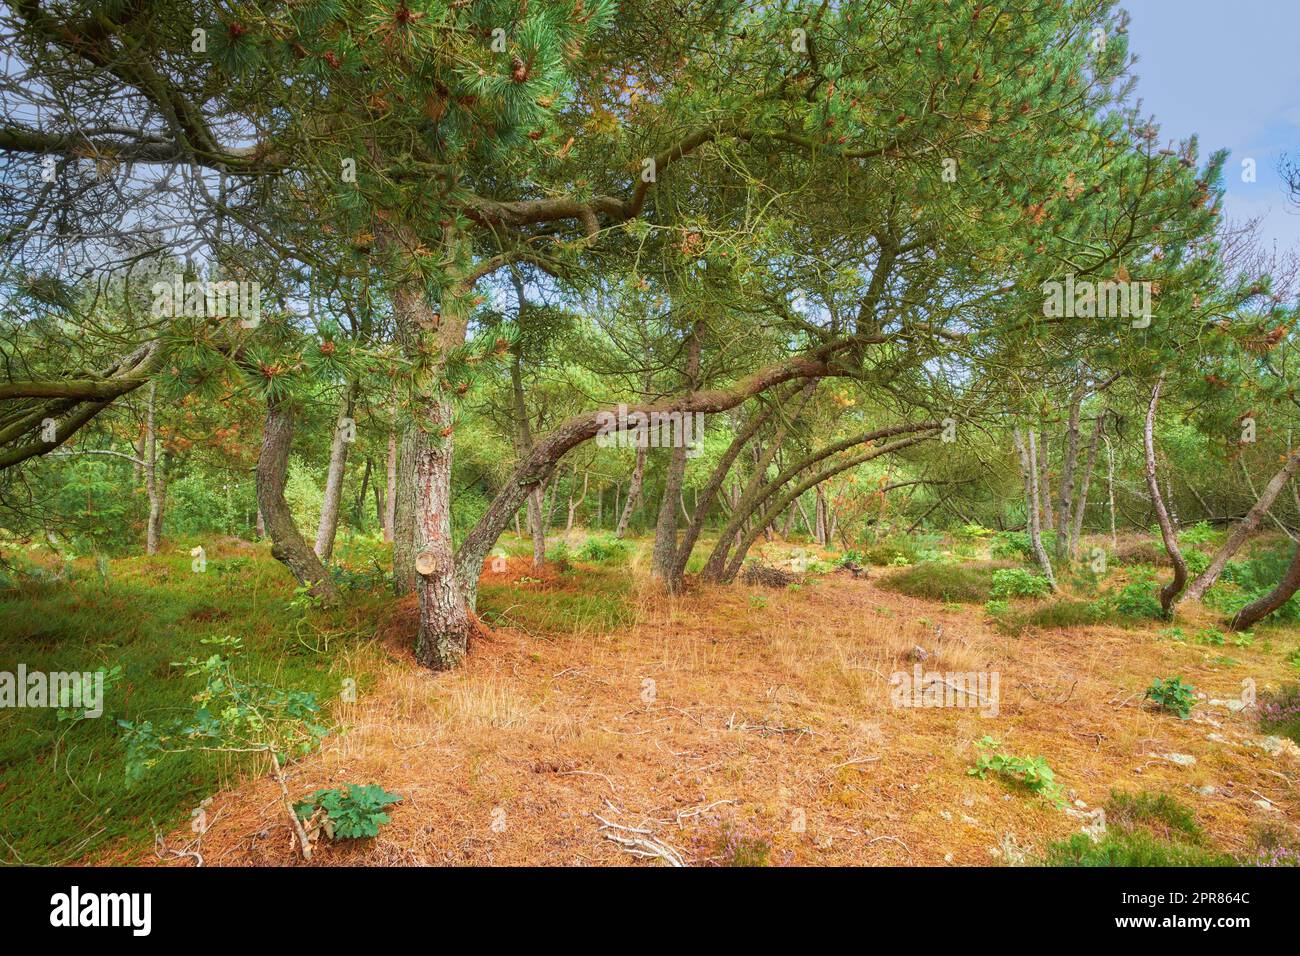 Forest with bent trees and green plants in Autumn. Landscape of many pine trees and branches in nature. Lots of uncultivated vegetation and shrubs growing in a secluded woodland environment in Sweden Stock Photo